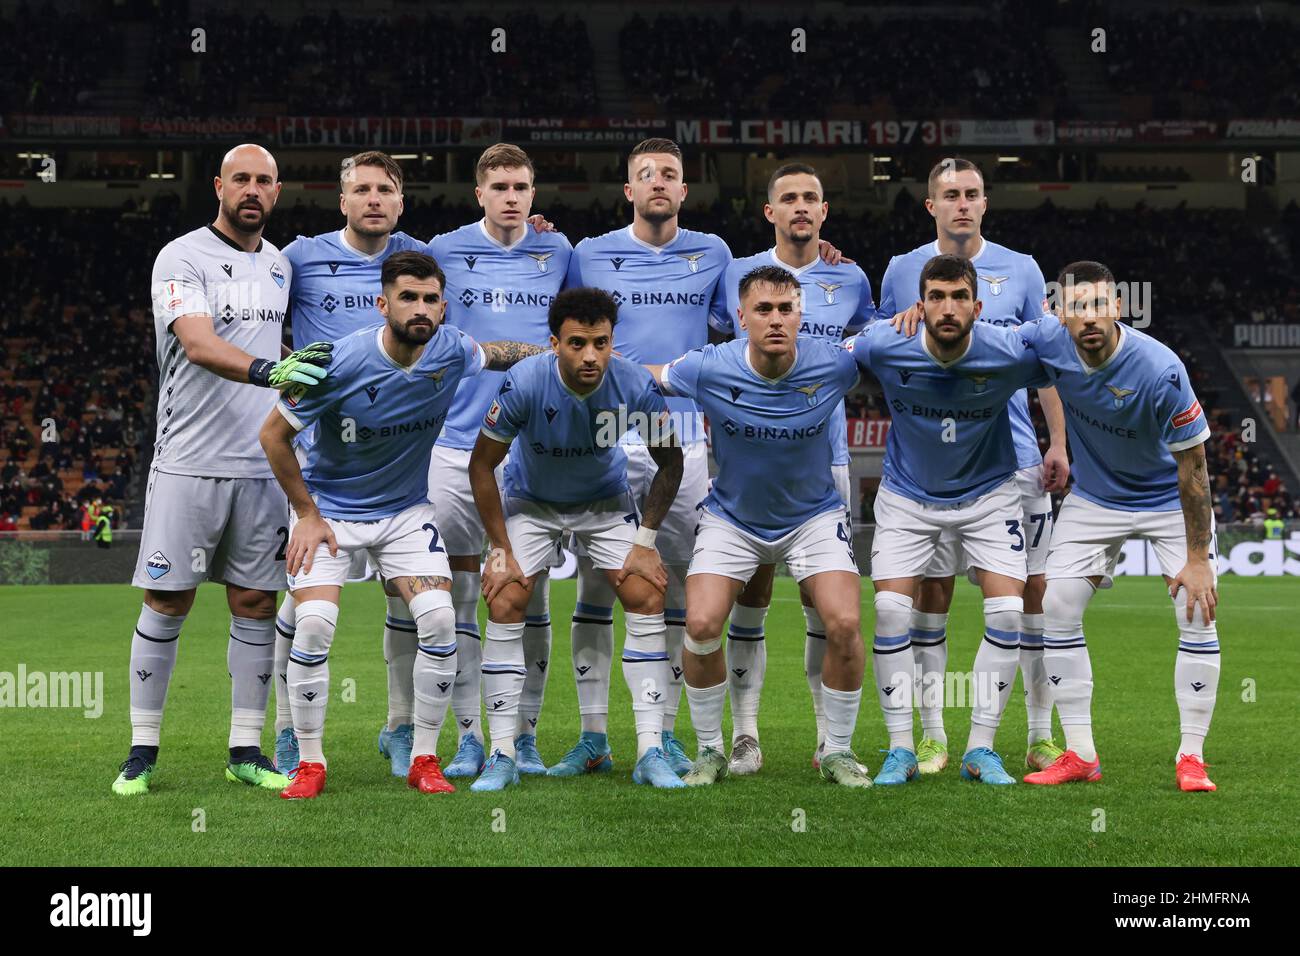 Milan, Italy, 9th February 2022. The SS Lazio starting eleven line up prior to kick off, back row ( L to R ); Pepe Reina, Ciro Immobile, Toma Basic, Sergej Milinkovic-Savic, Luis Felipe and Adam Marusic, front row ( L to R ); Elseid Hysaj, Felipe Anderson, Gil Patric, Danilo Cataldi and Mattia Zaccagni, in the Coppa Italia match at Giuseppe Meazza, Milan. Picture credit should read: Jonathan Moscrop / Sportimage Credit: Sportimage/Alamy Live News Stock Photo